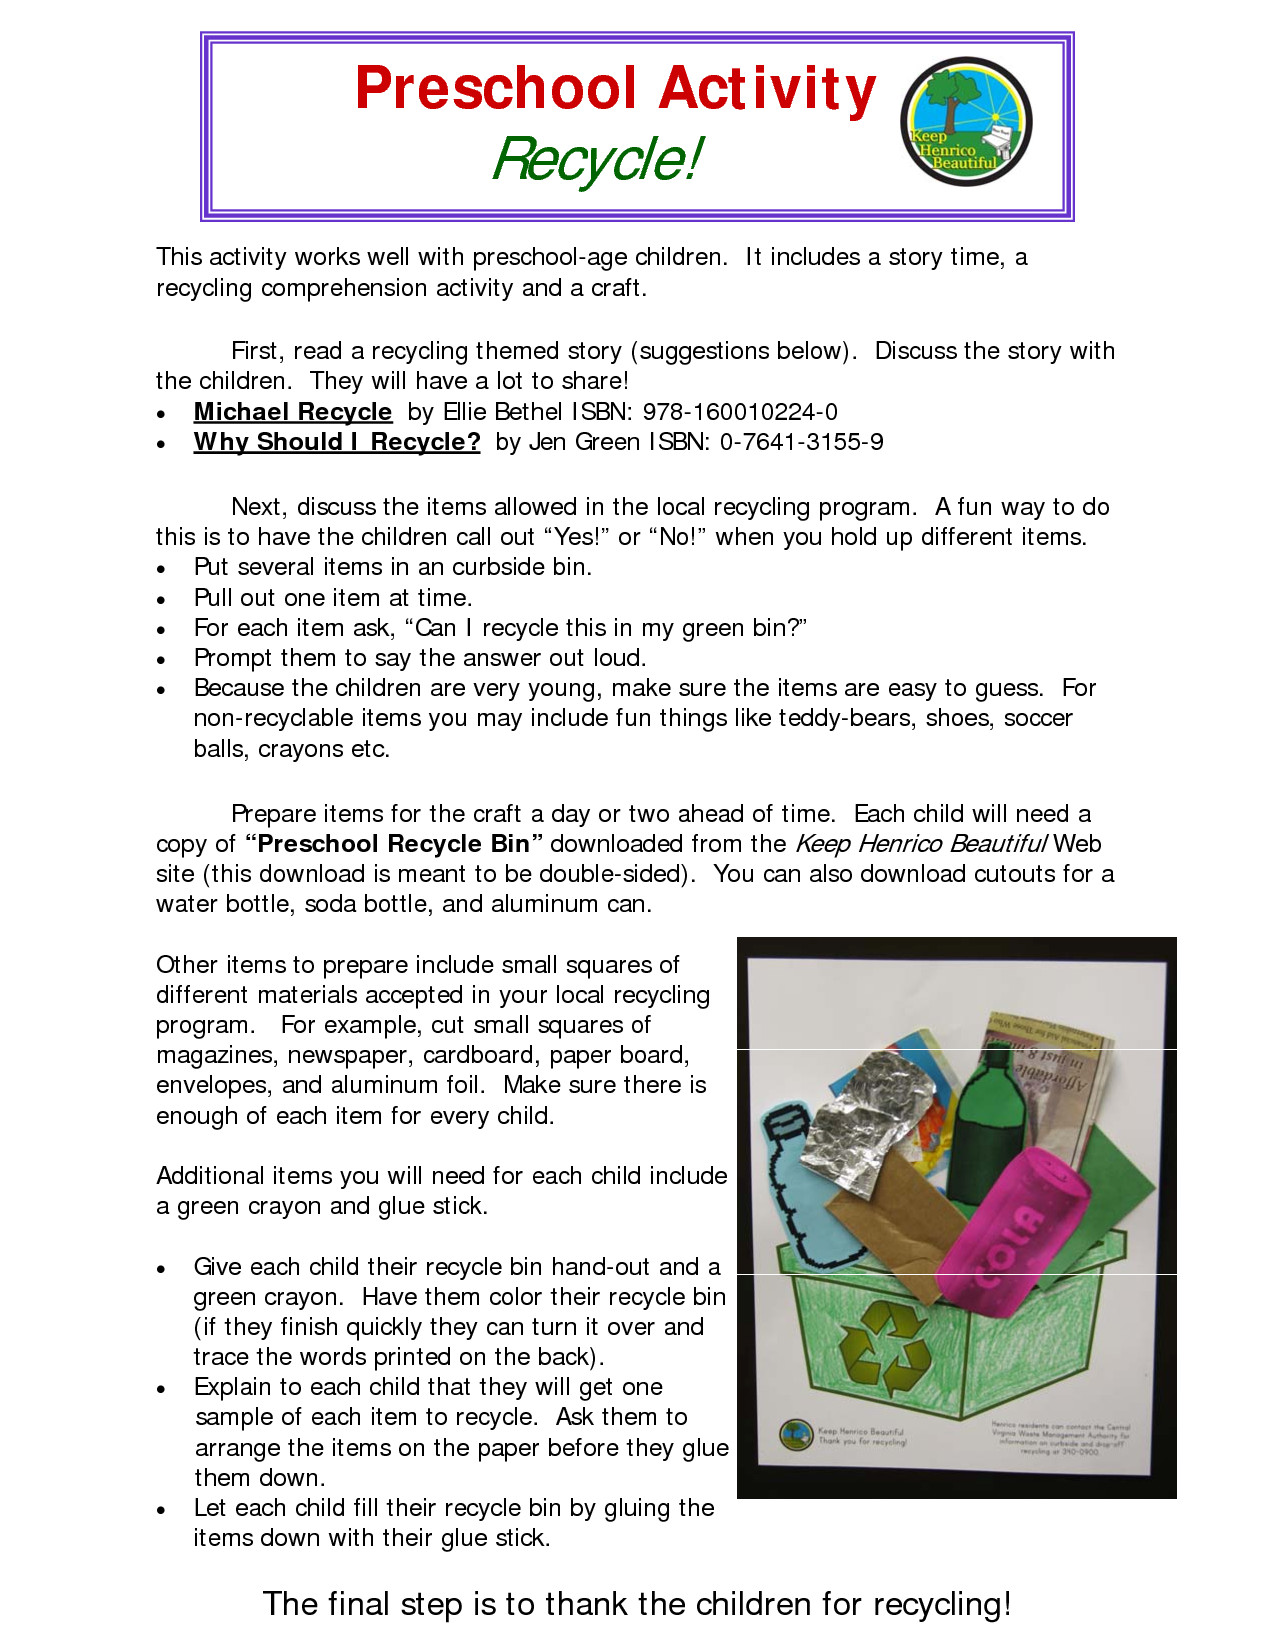 Recycling Lesson Plan Recycling Preschool Activity Worksheet Link